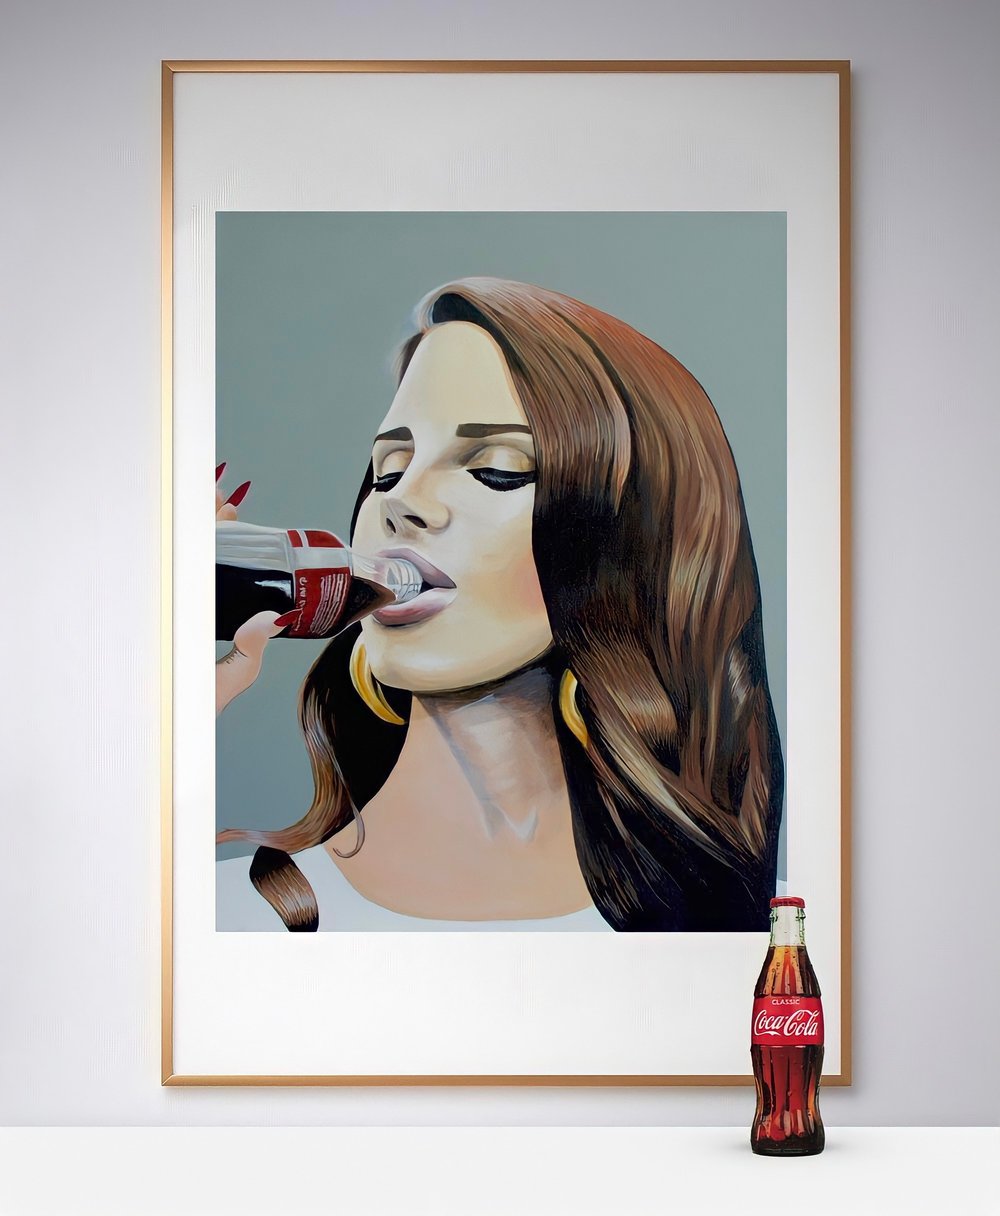 Image of *SOLD OUT* Cola Limited Edition Poster Print 